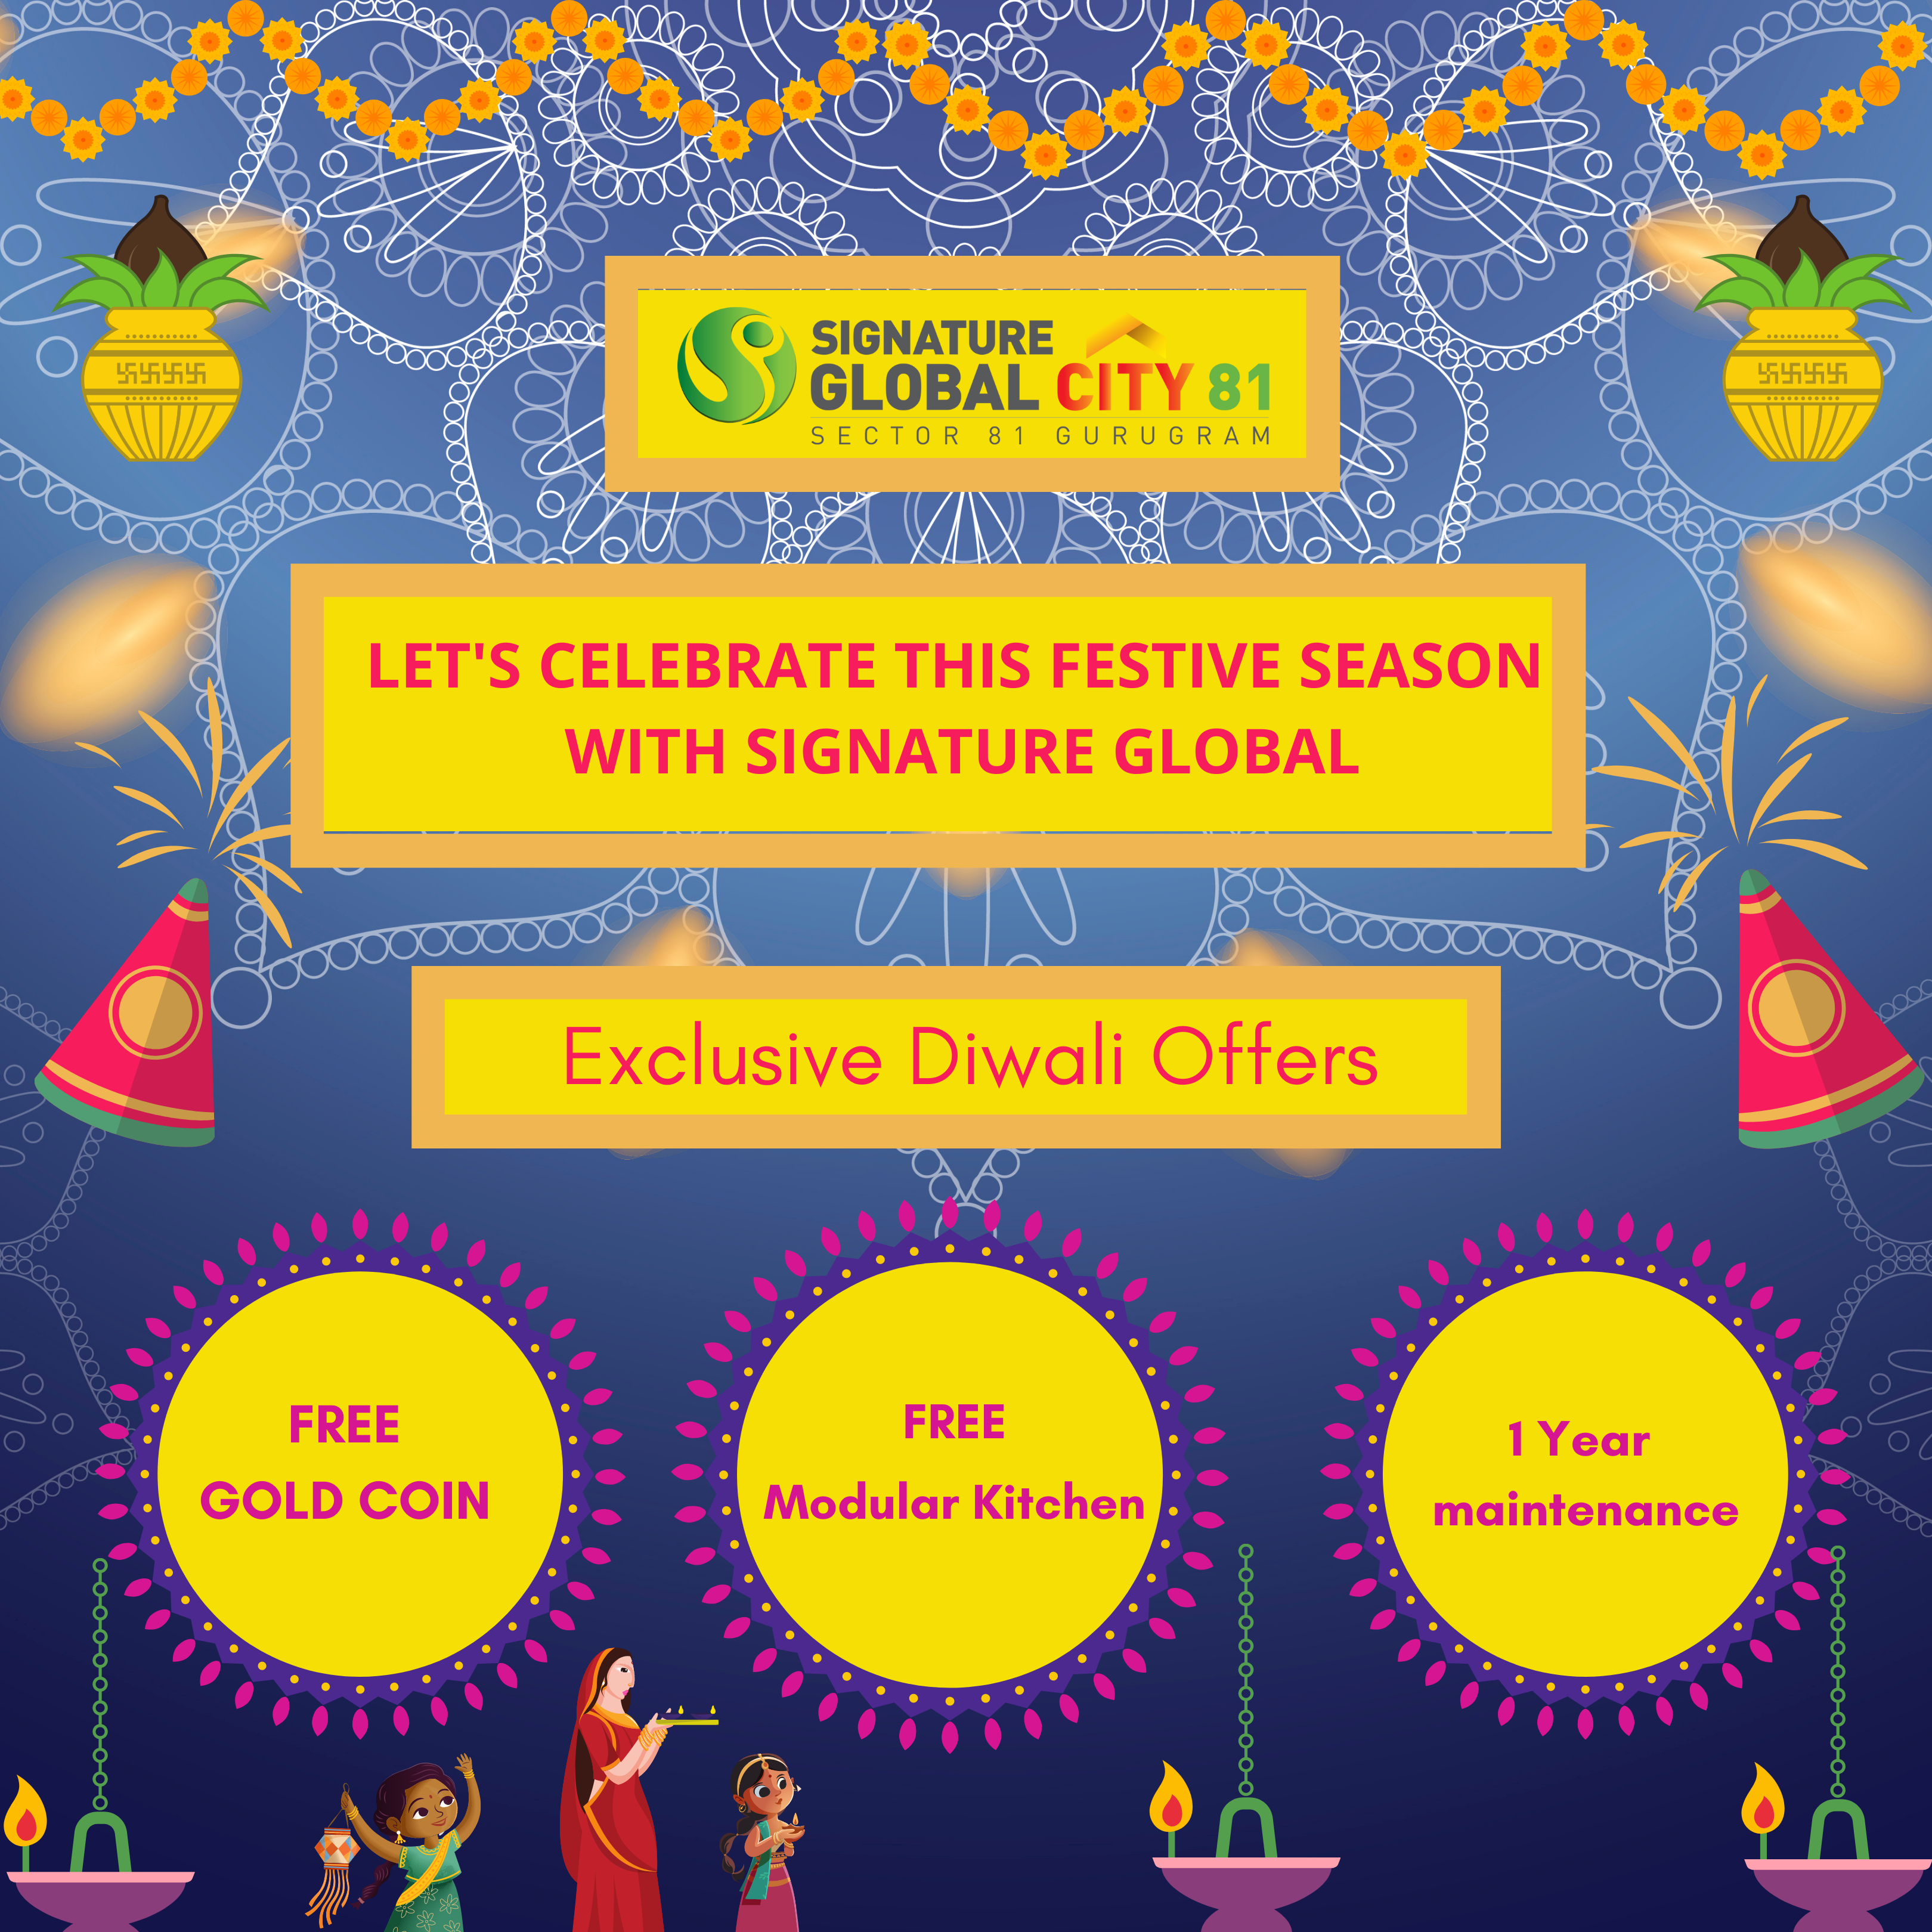 Lets Celebrate This Diwali Season with Signature Global city 81 with Exclusive Offers Update